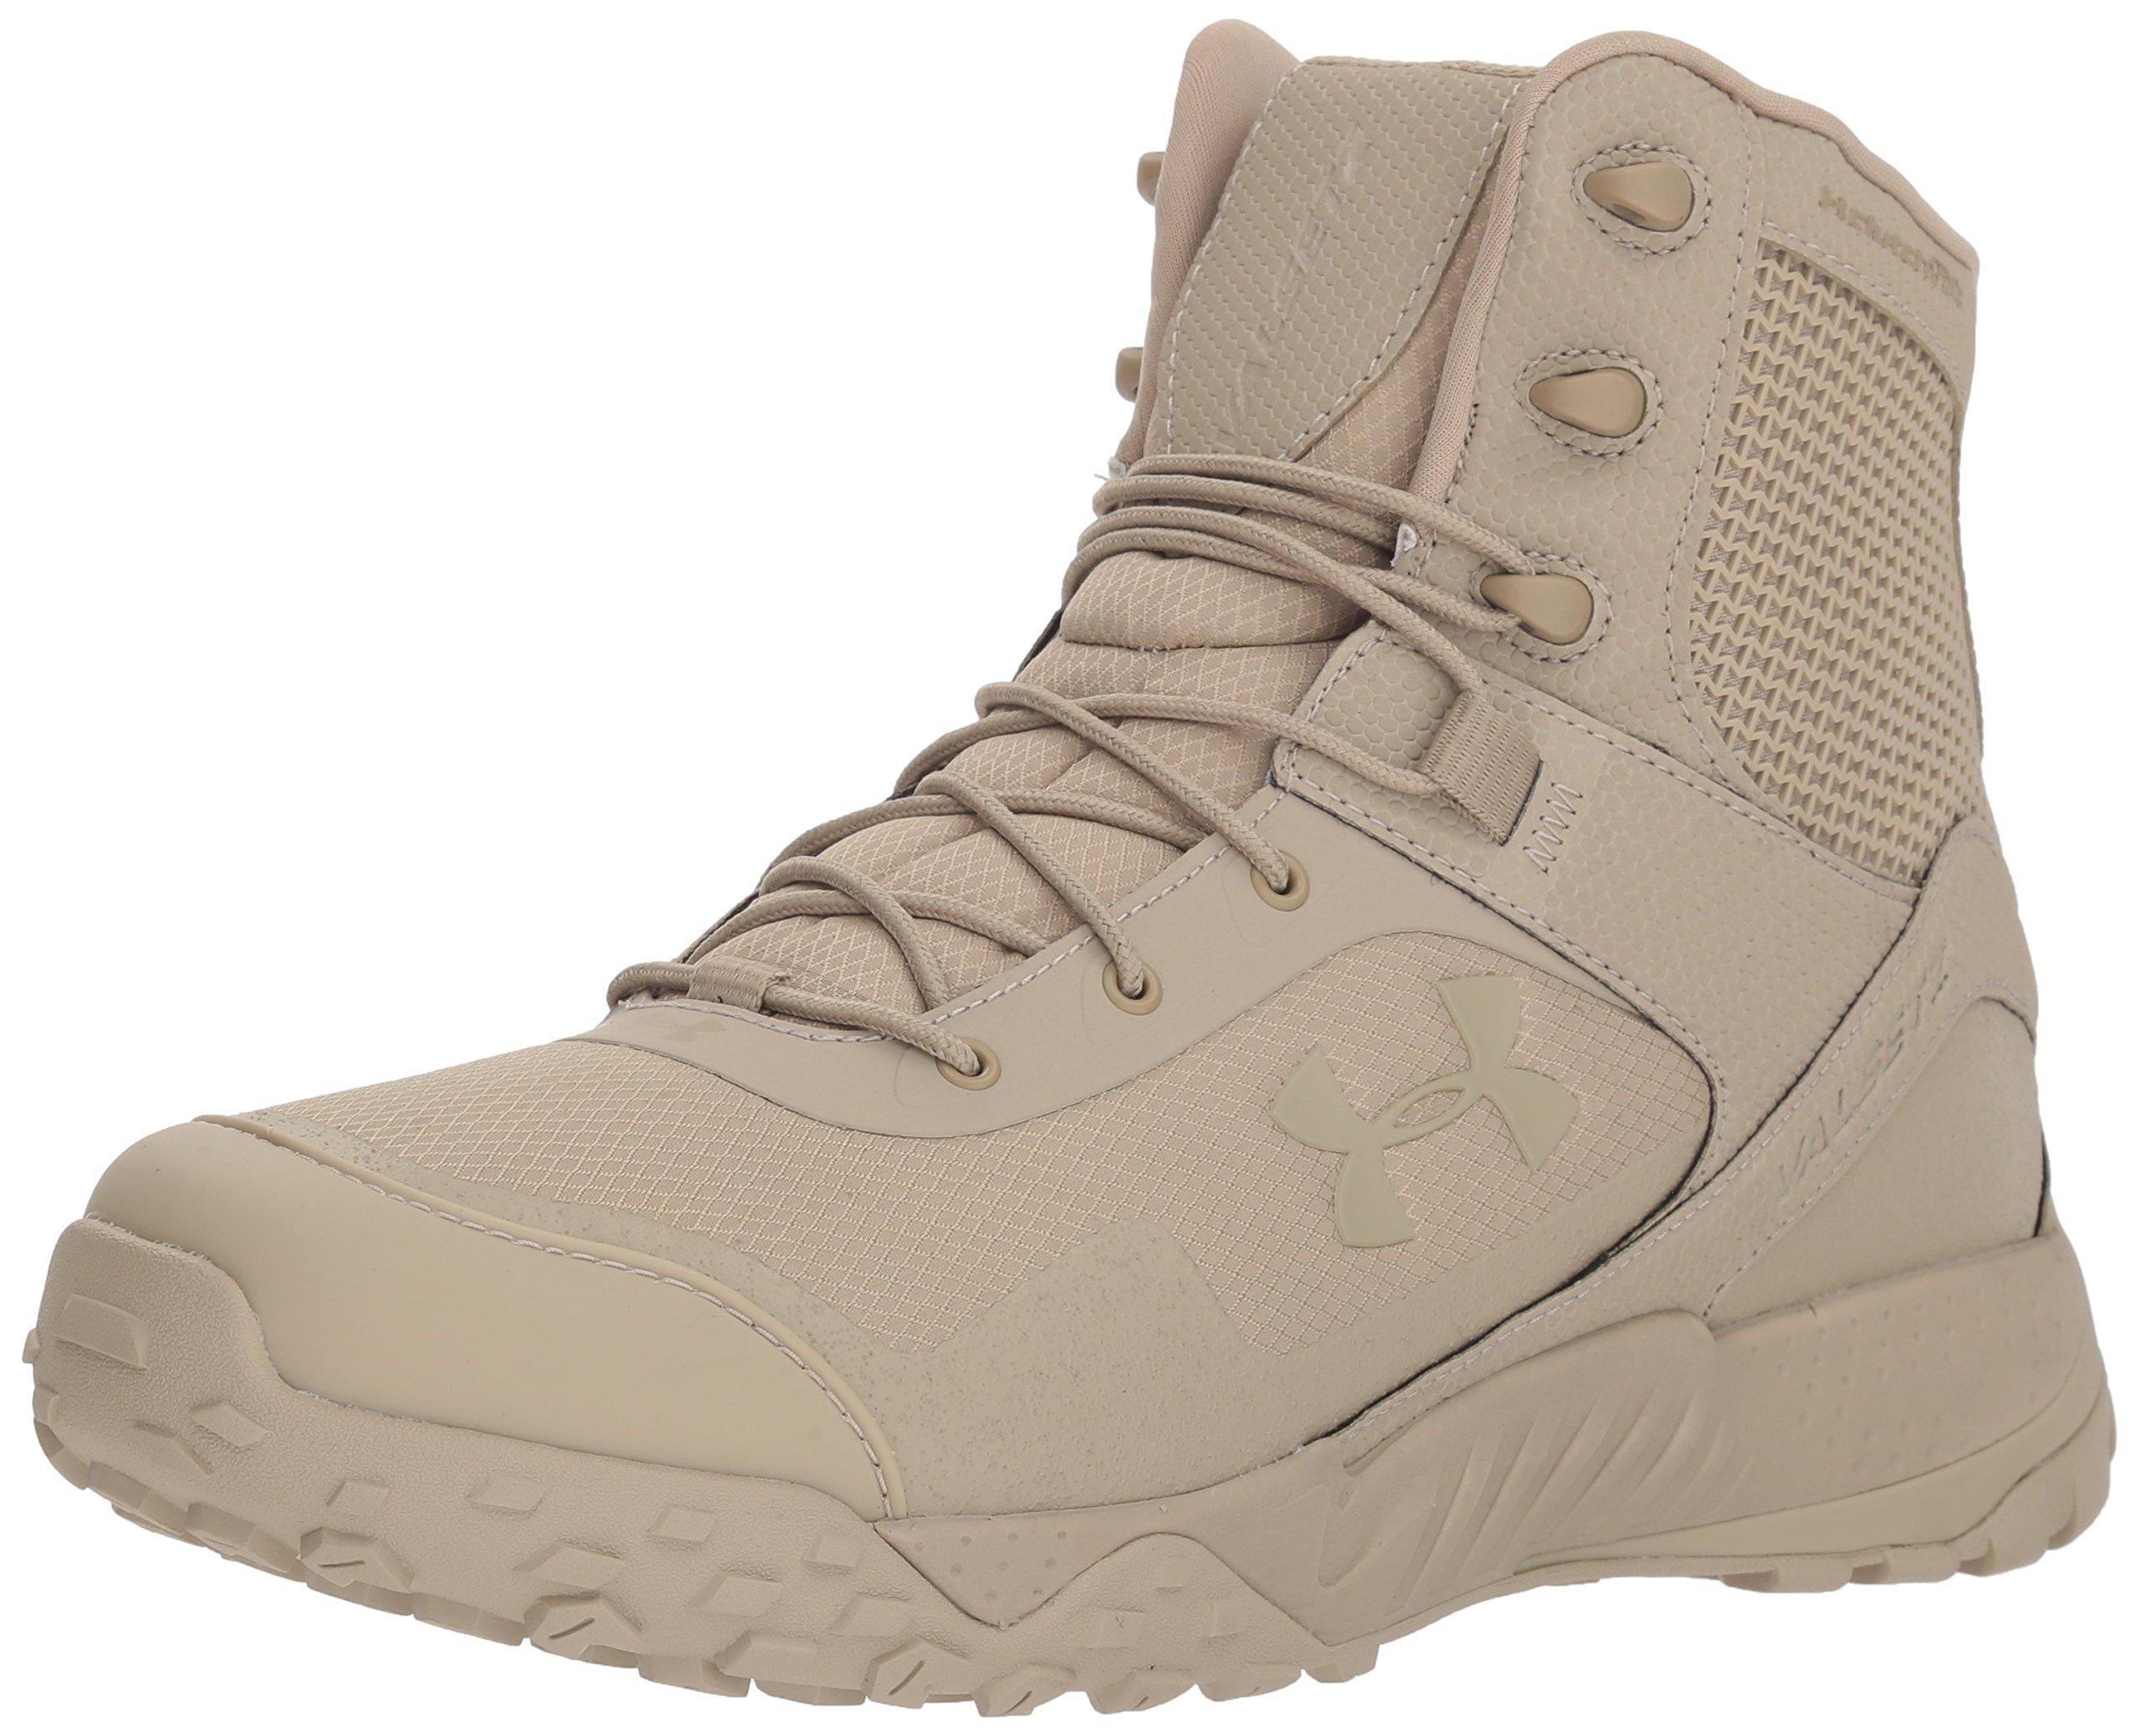 Under Armour Men's Valsetz Rts 1.5 Waterproof Military and Tactical Boot